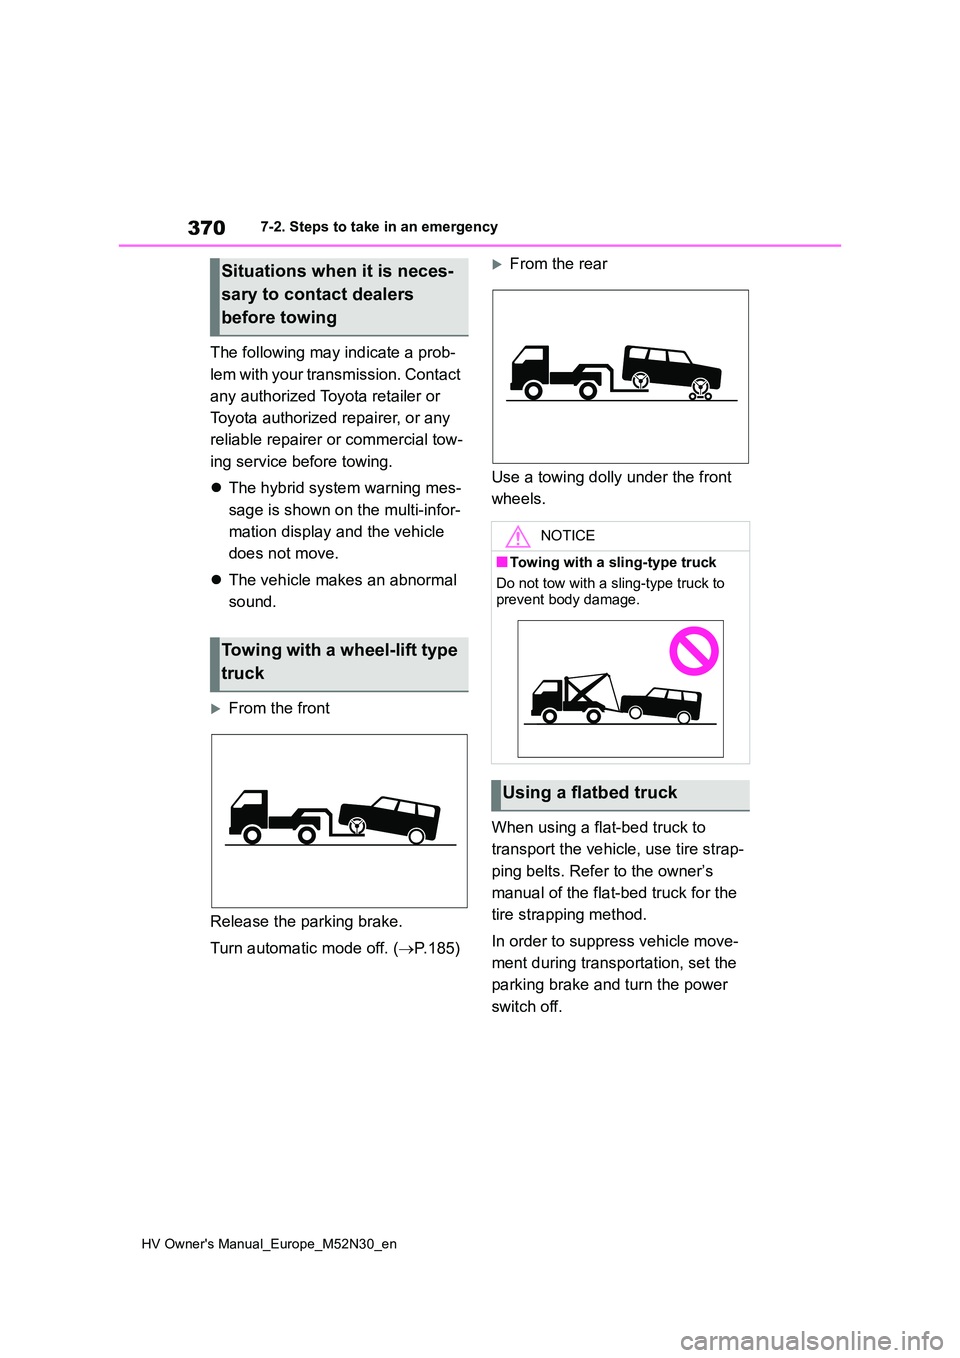 TOYOTA YARIS 2022  Owners Manual 370
HV Owner's Manual_Europe_M52N30_en
7-2. Steps to take in an emergency
The following may indicate a prob- 
lem with your transmission. Contact  
any authorized Toyota retailer or  
Toyota autho